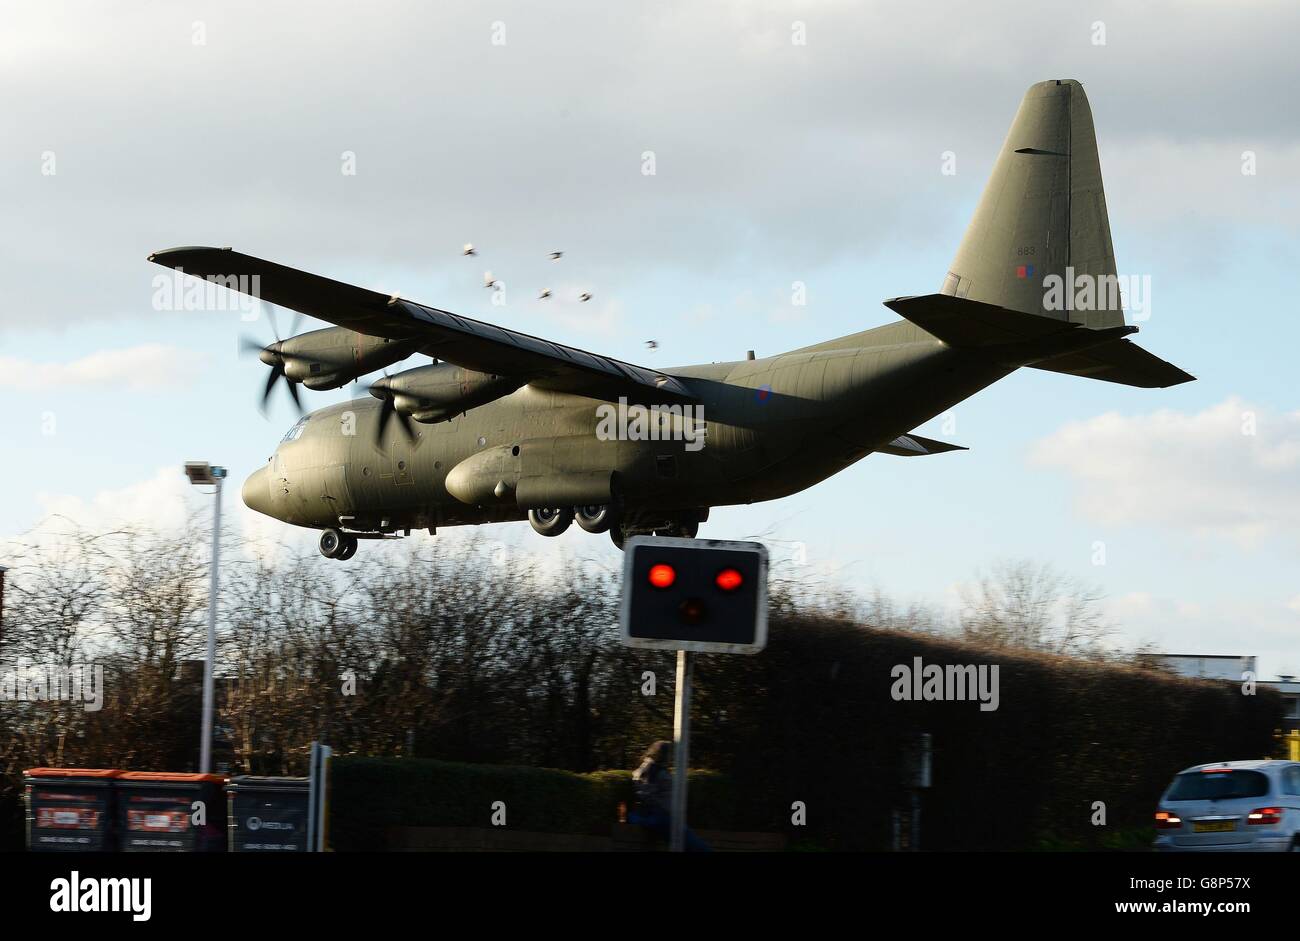 A RAF Hercules transport plane prepares to land at RAF Northolt carrying Pauline Cafferley, who contracted the Ebola disease while working as a nurse in Sierra Leone in December 2014, and is now being transferred to the London Free Hospital for the third time. Stock Photo